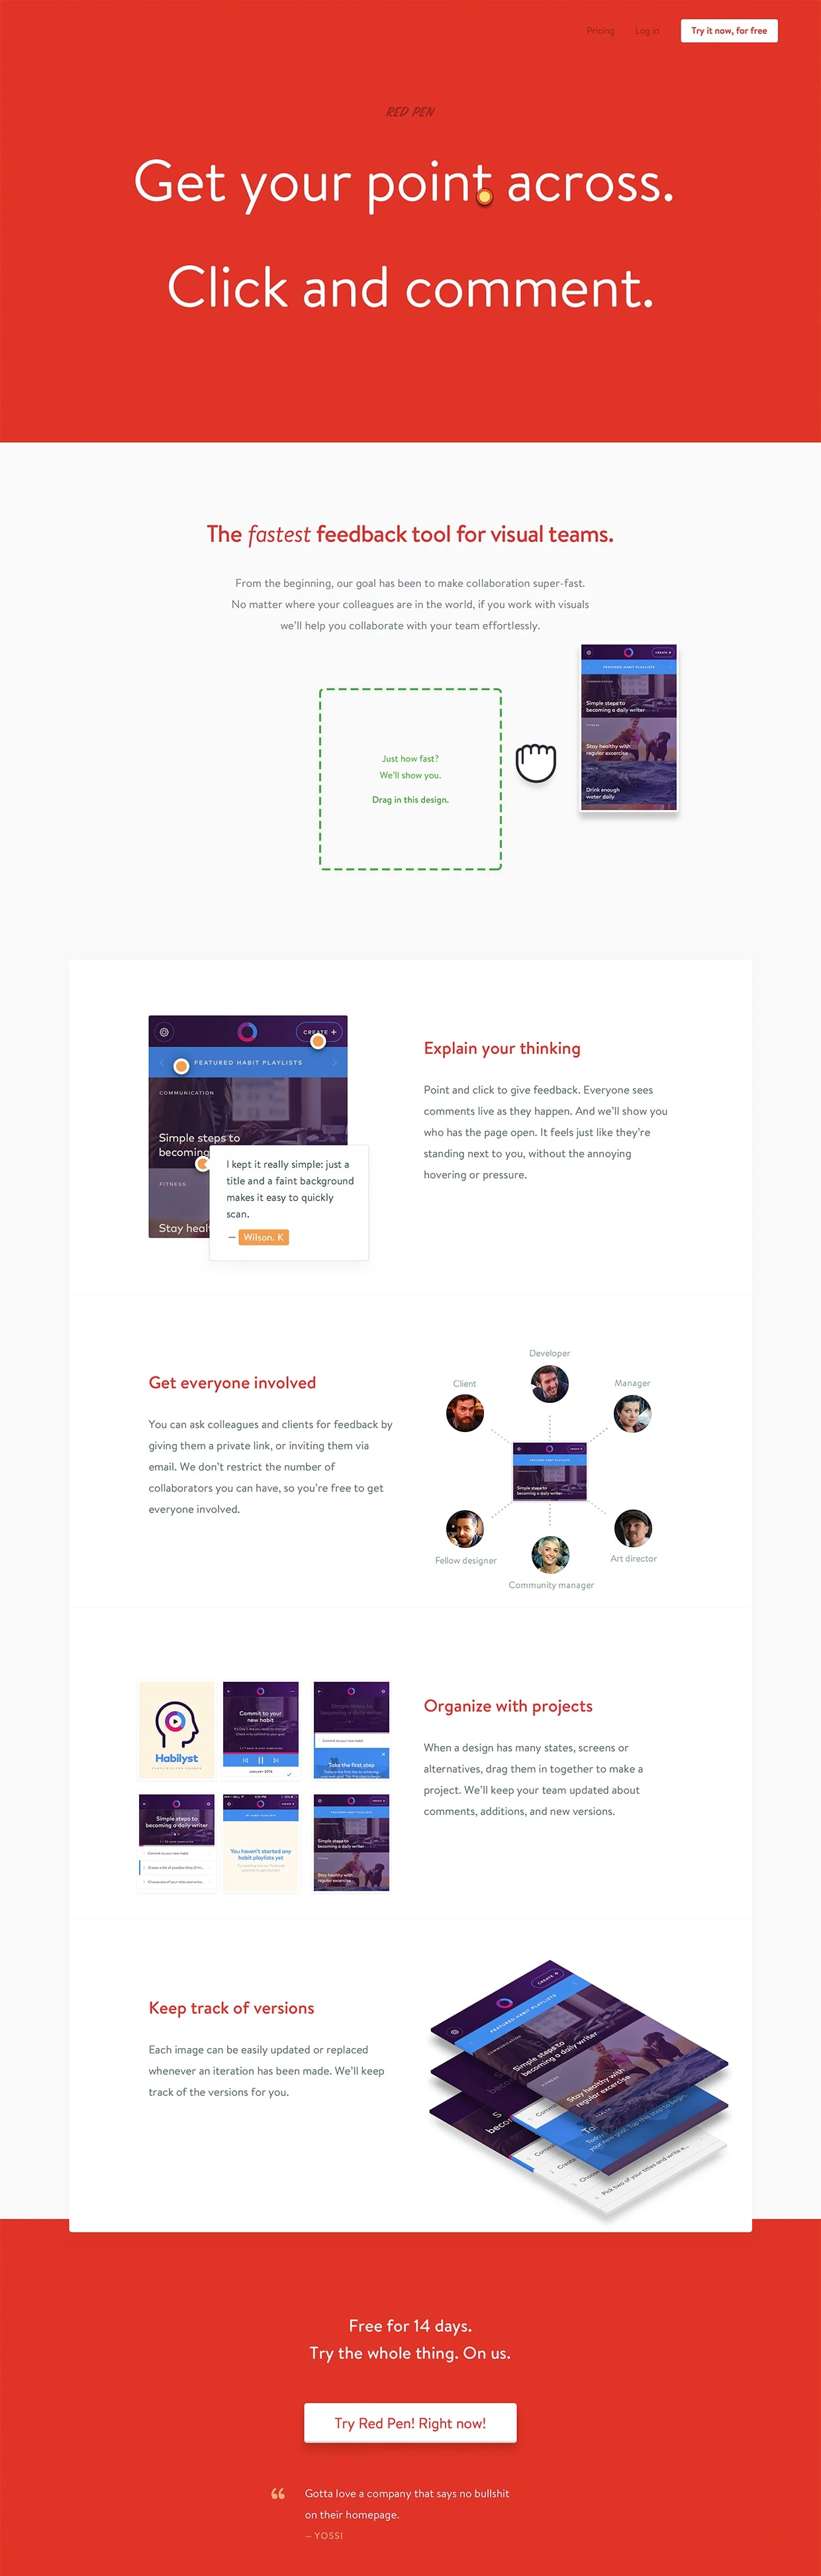 Red Pen Landing Page Example: Upload your design and get live, annotated feedback. It's the simplest way to get thoughts from the people you trust.